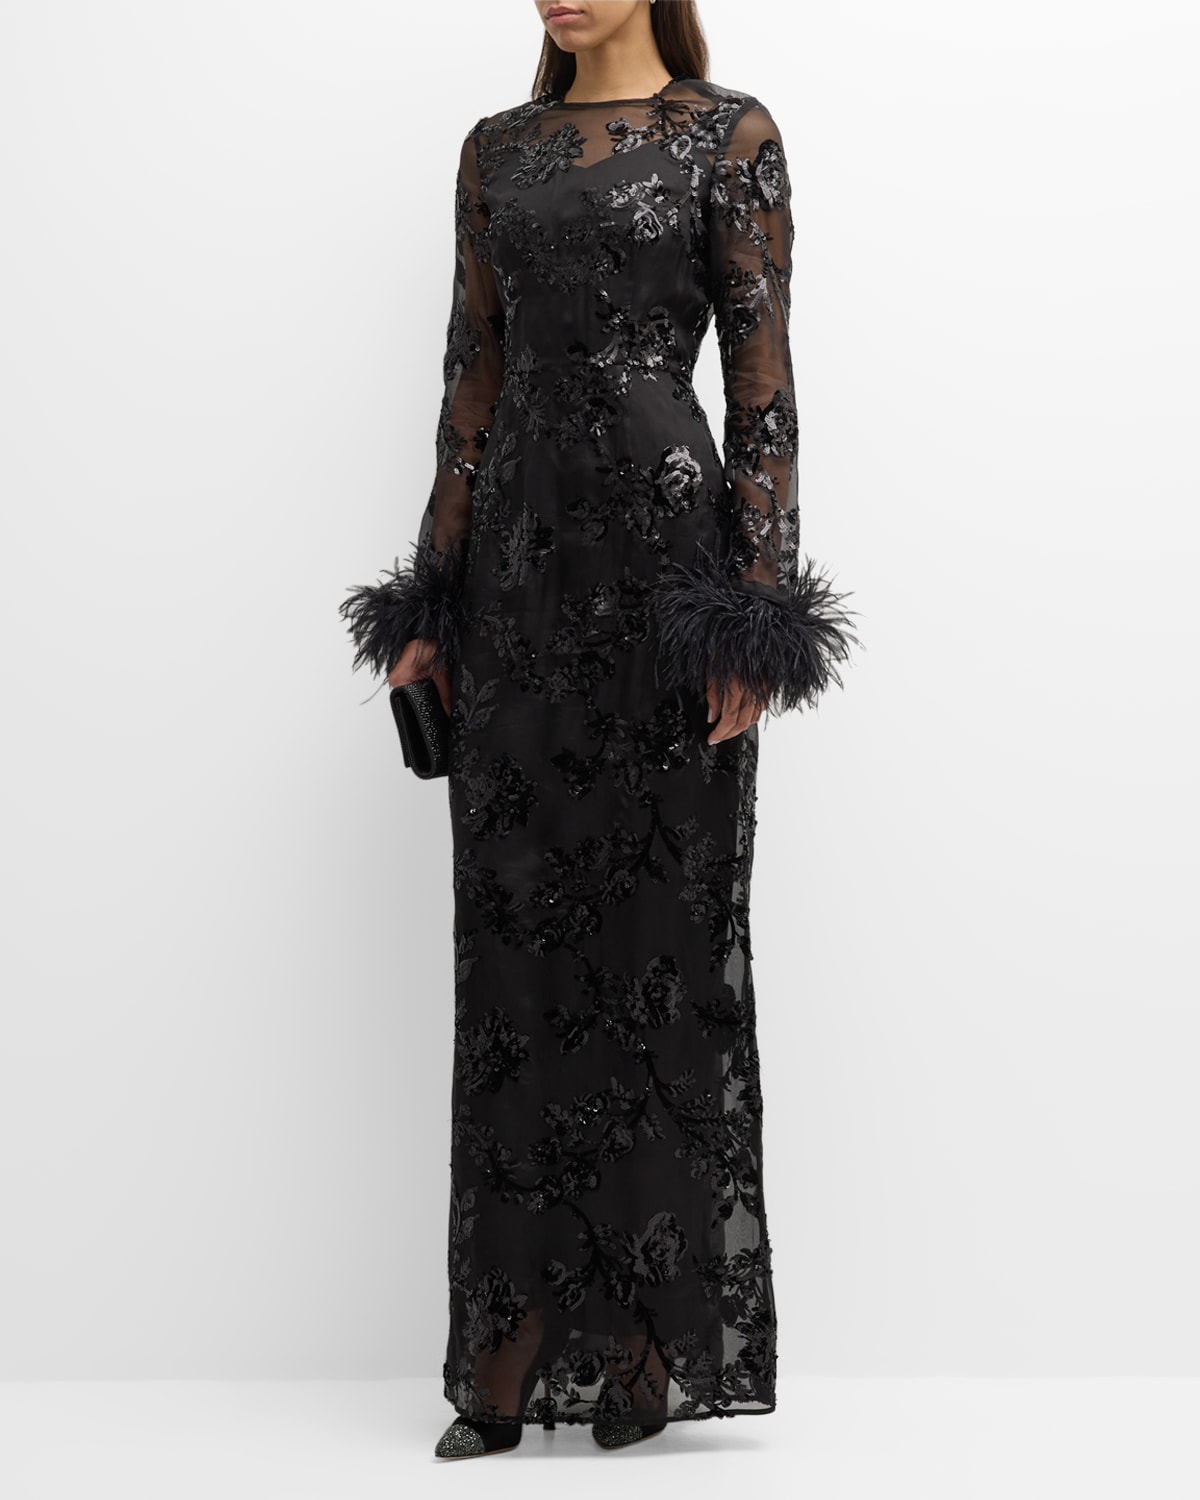 ERDEM SEQUIN WAISTED COLUMN GOWN WITH FEATHER CUFFS